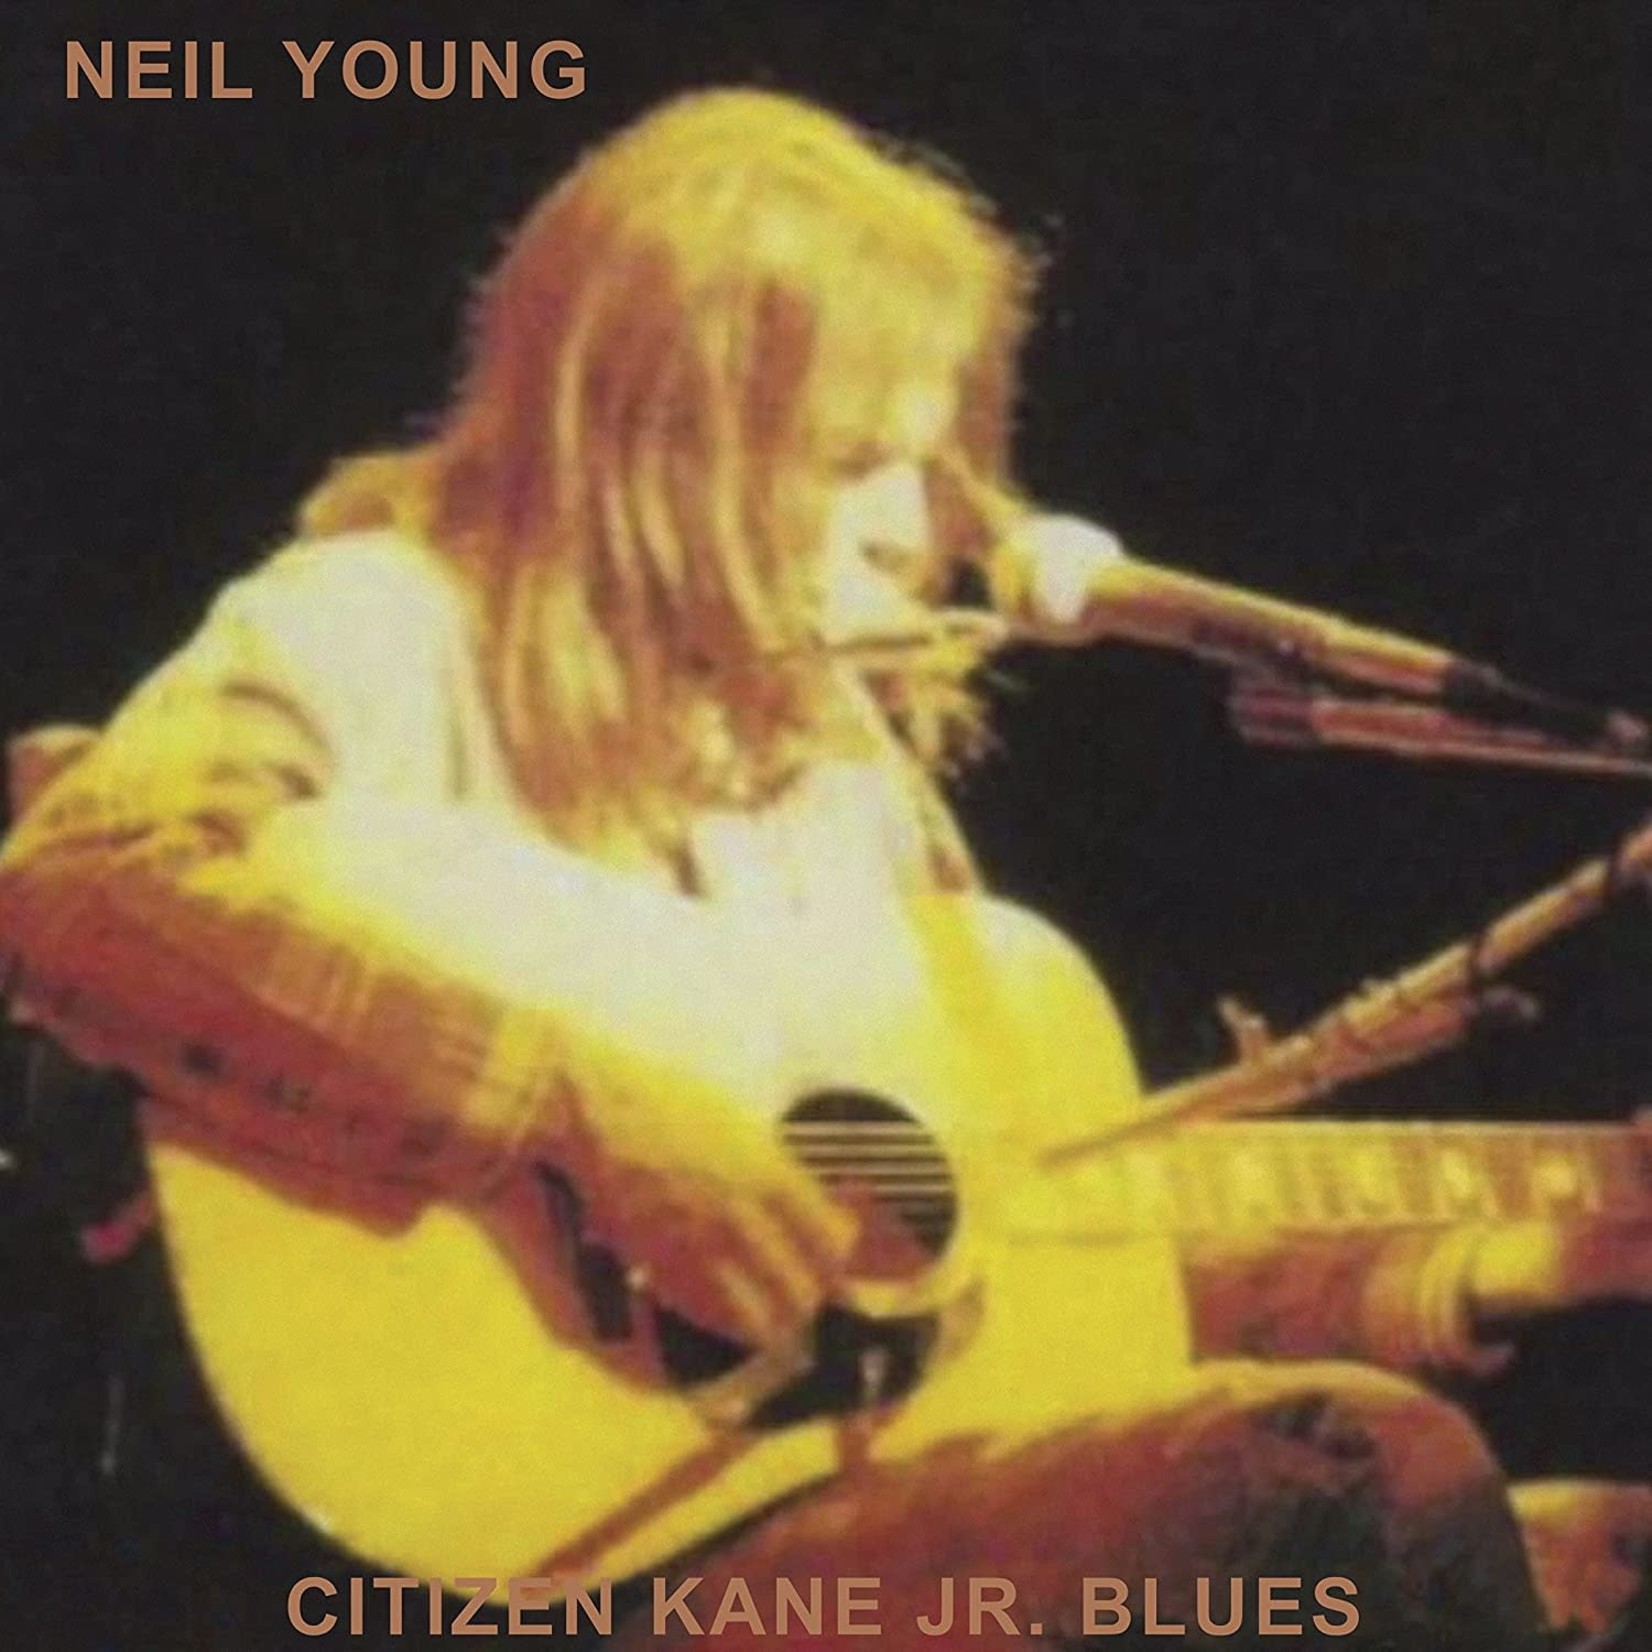 Neil Young - Citizen Kane Jr. Blues 1974: Live At The Bottom Line [CD]